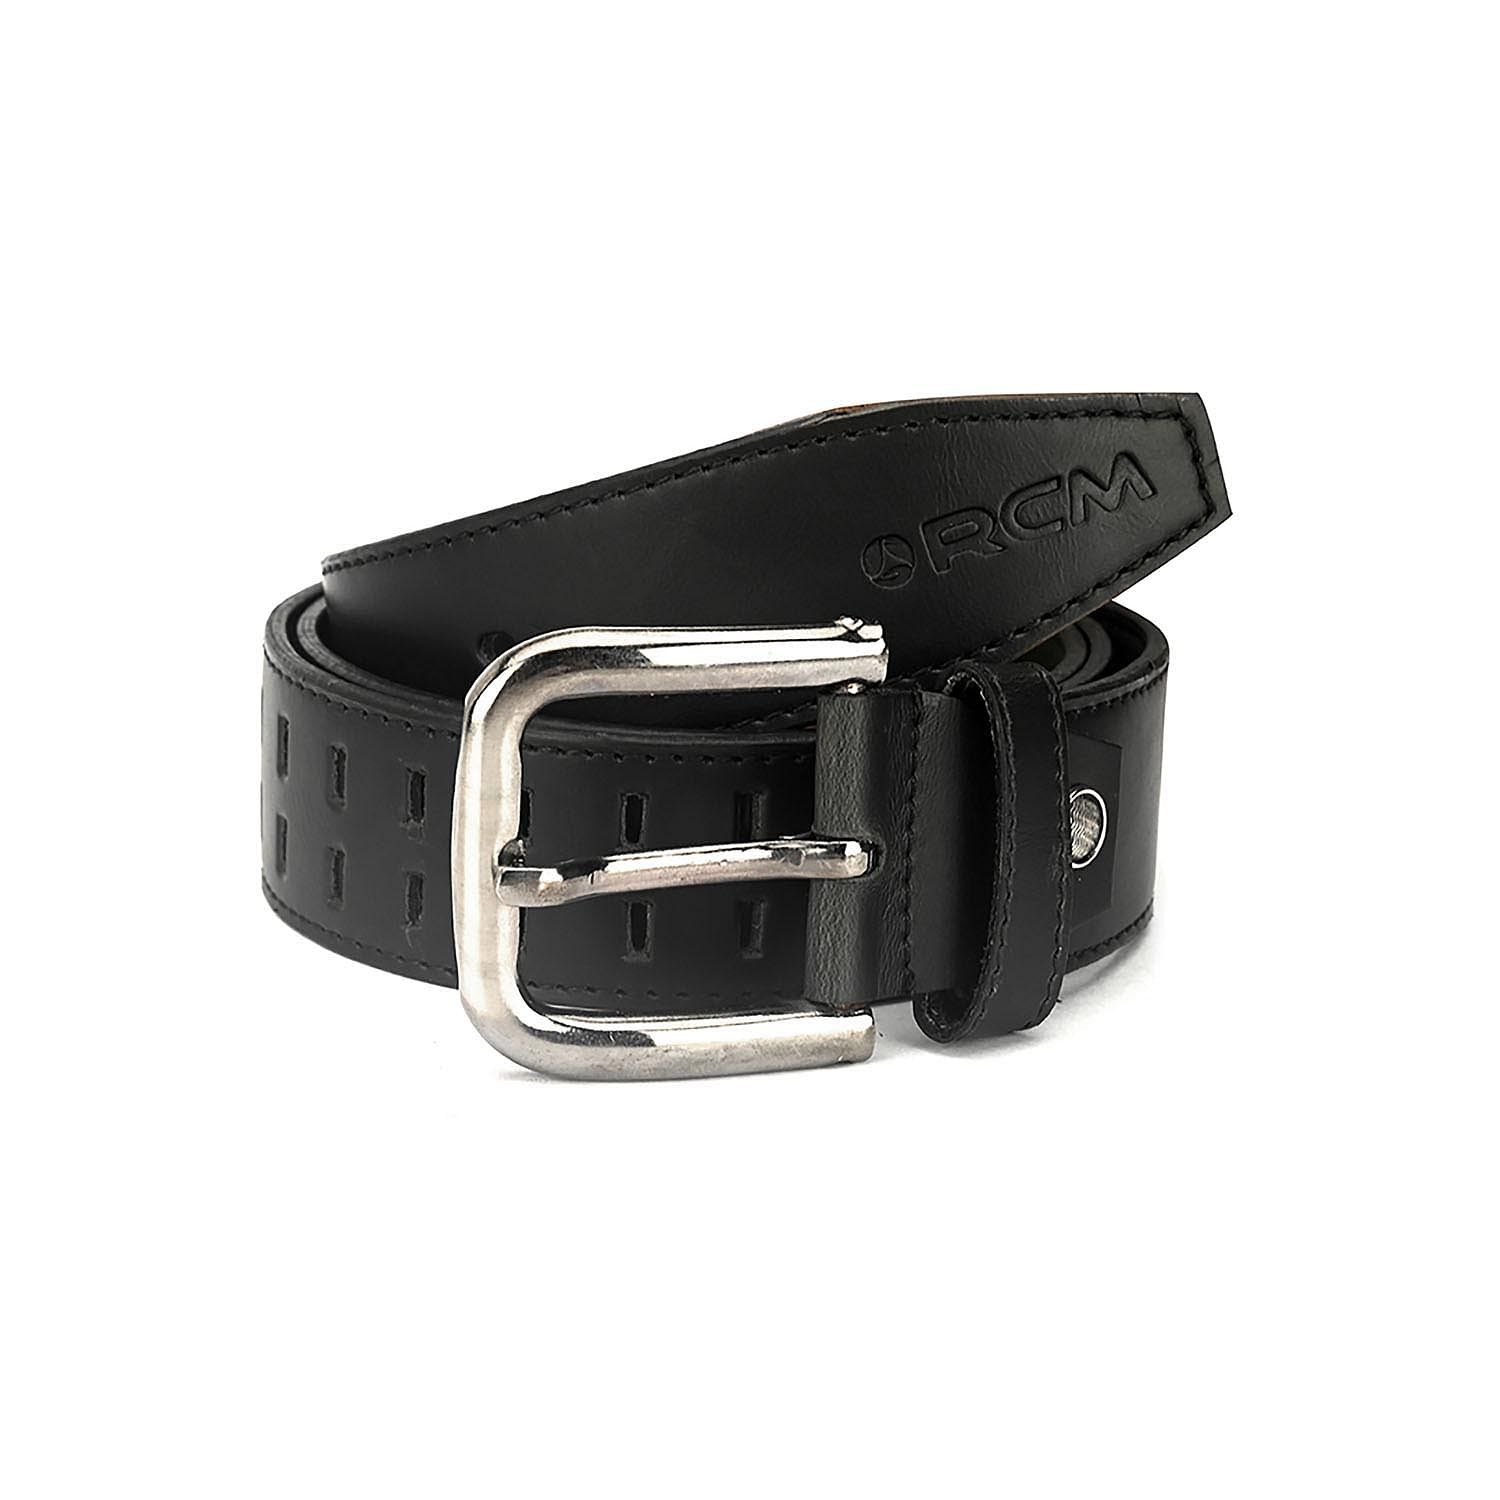 Men's Casual Textured Perforated Belt Black - LZ-CB-104